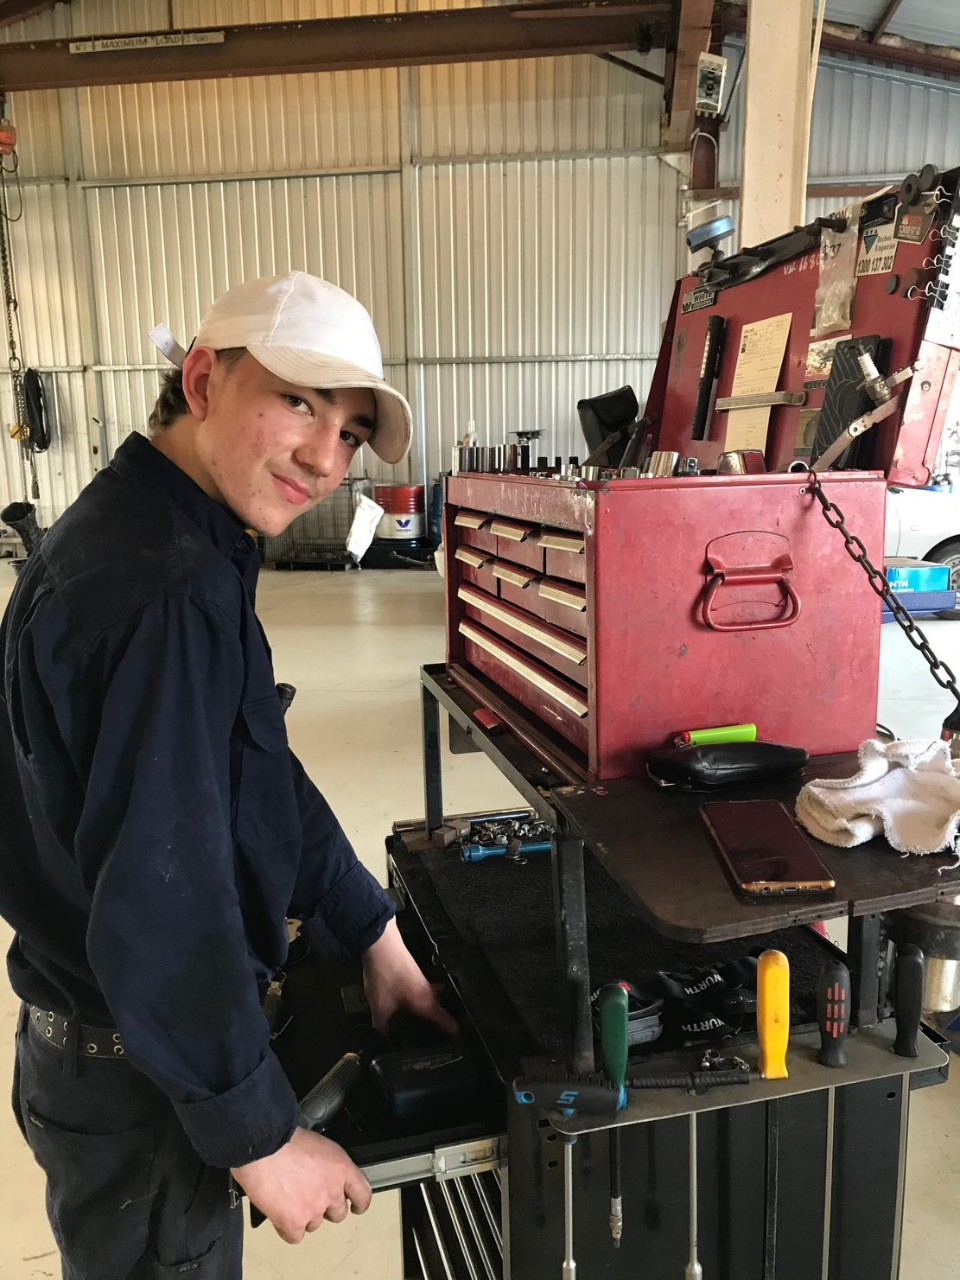 Photo of student with a white hat, and black collared shirt and black pants. He is smiling, and opening a red toolbox in a workshop